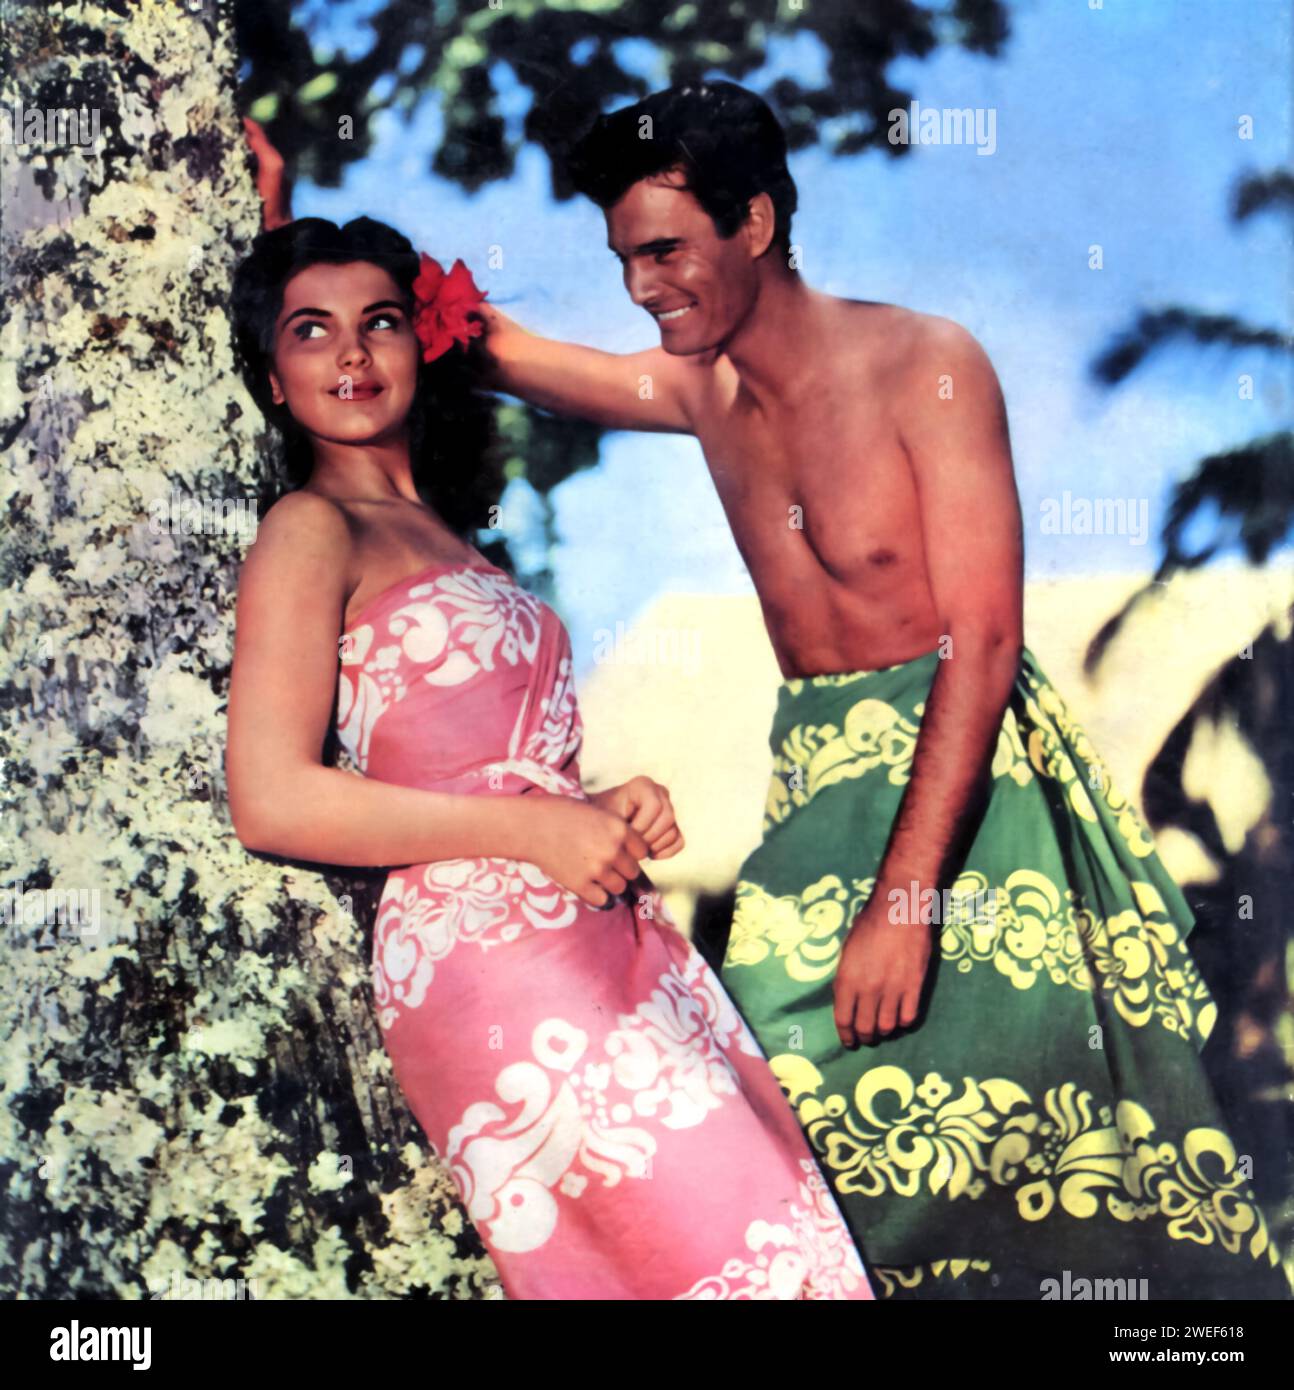 A portrait of Debra Paget and Jeff Chandler, stars of the film 'Bird of Paradise' (1951). In this romantic drama set in the lush and exotic Polynesian islands, Paget plays Kalua, a beautiful native princess. Chandler portrays Andre Laurence, a young American who becomes shipwrecked on the island. The film unfolds around their forbidden love affair, as it conflicts with the island's taboos and traditions. Stock Photo